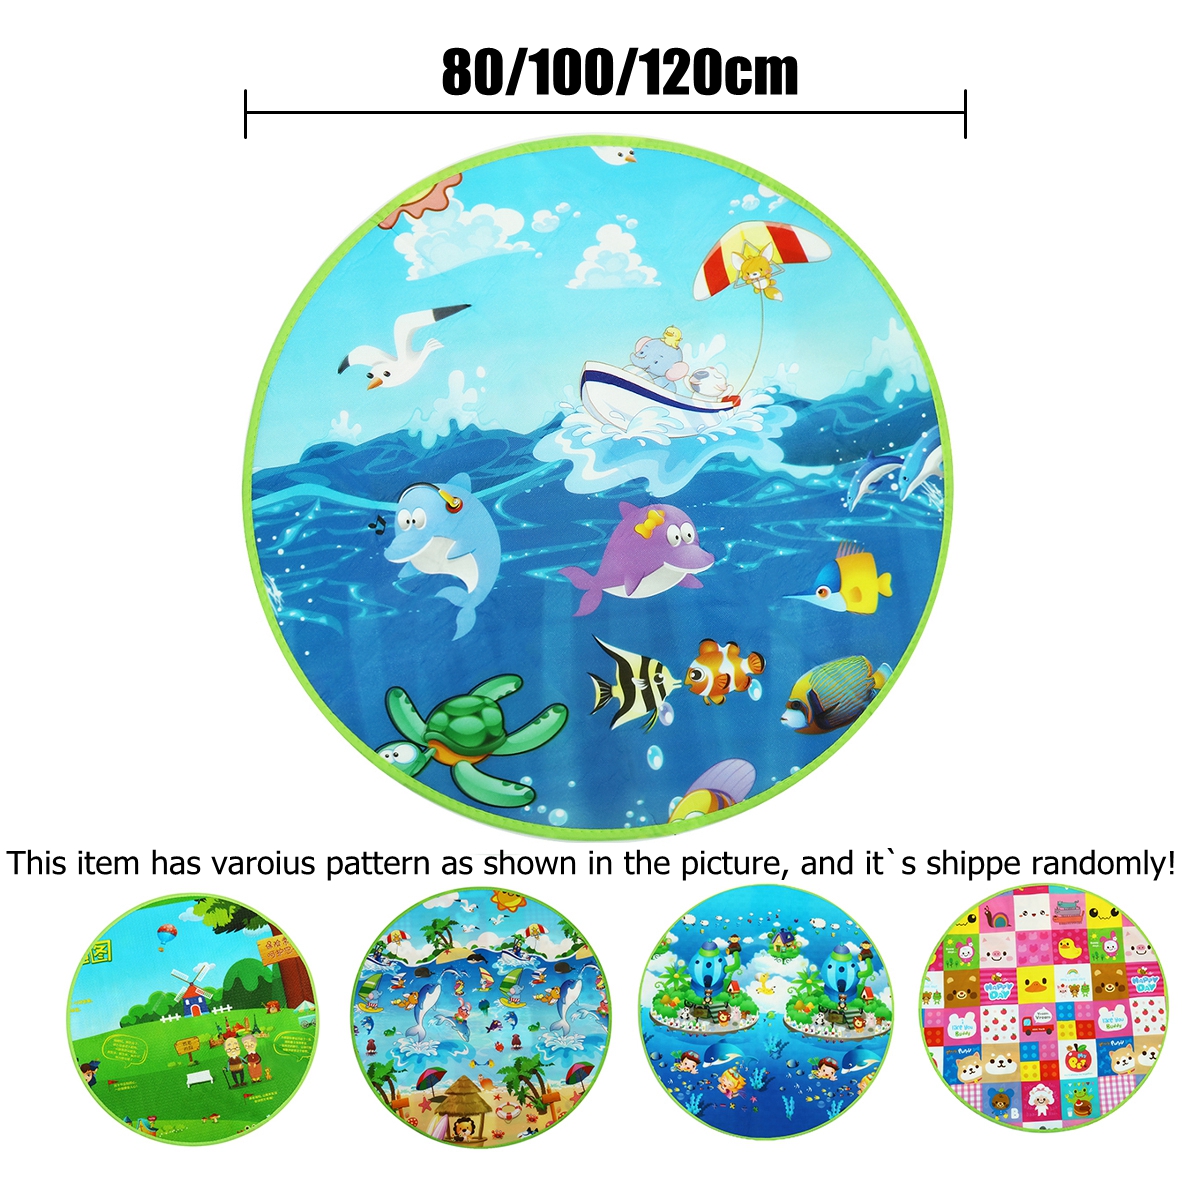 1cm-Thick-Dia-80100120cm-Baby-Crawling-Play-Mat-Educational-Alphabet-Game-Rug-For-Children-Puzzle-Ac-1632147-3